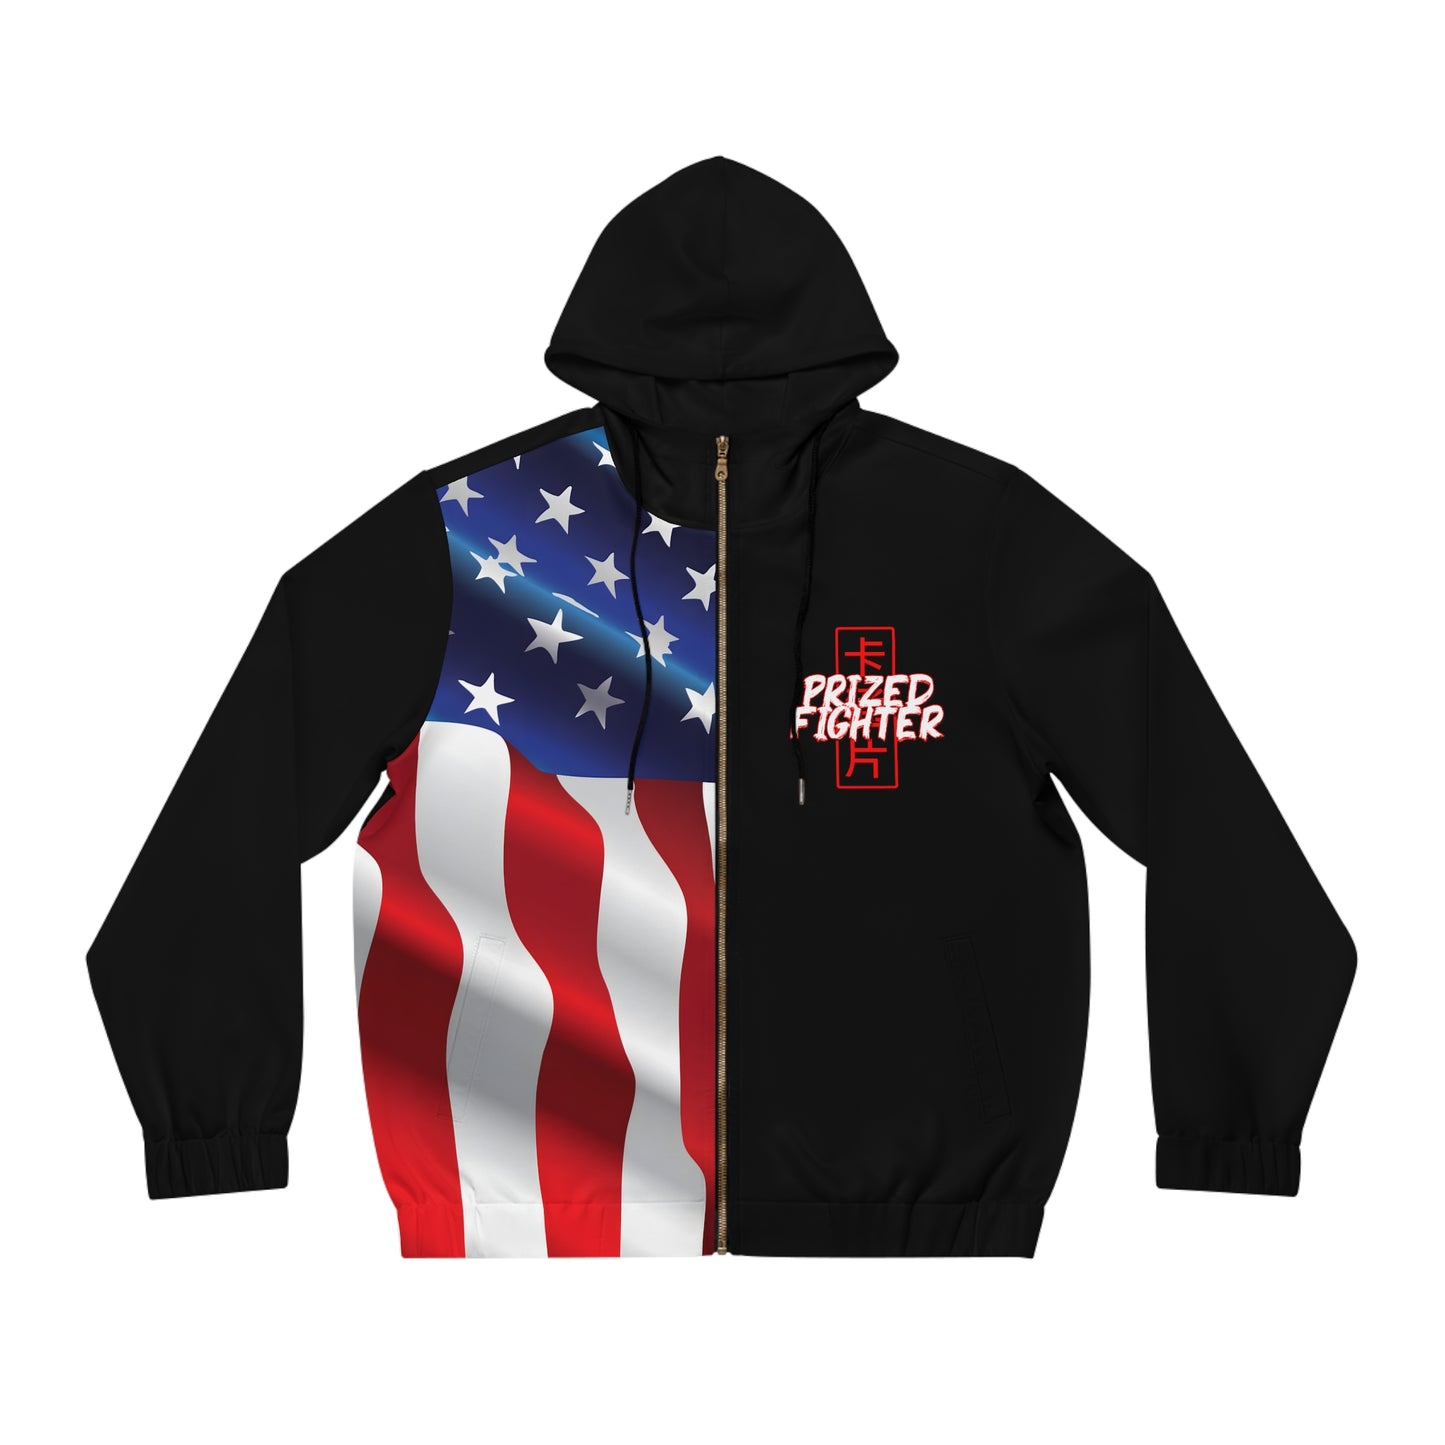 Kǎtōng Piàn - Prized Fighter Collection - America - 008 - Men's Full-Zip Hoodie